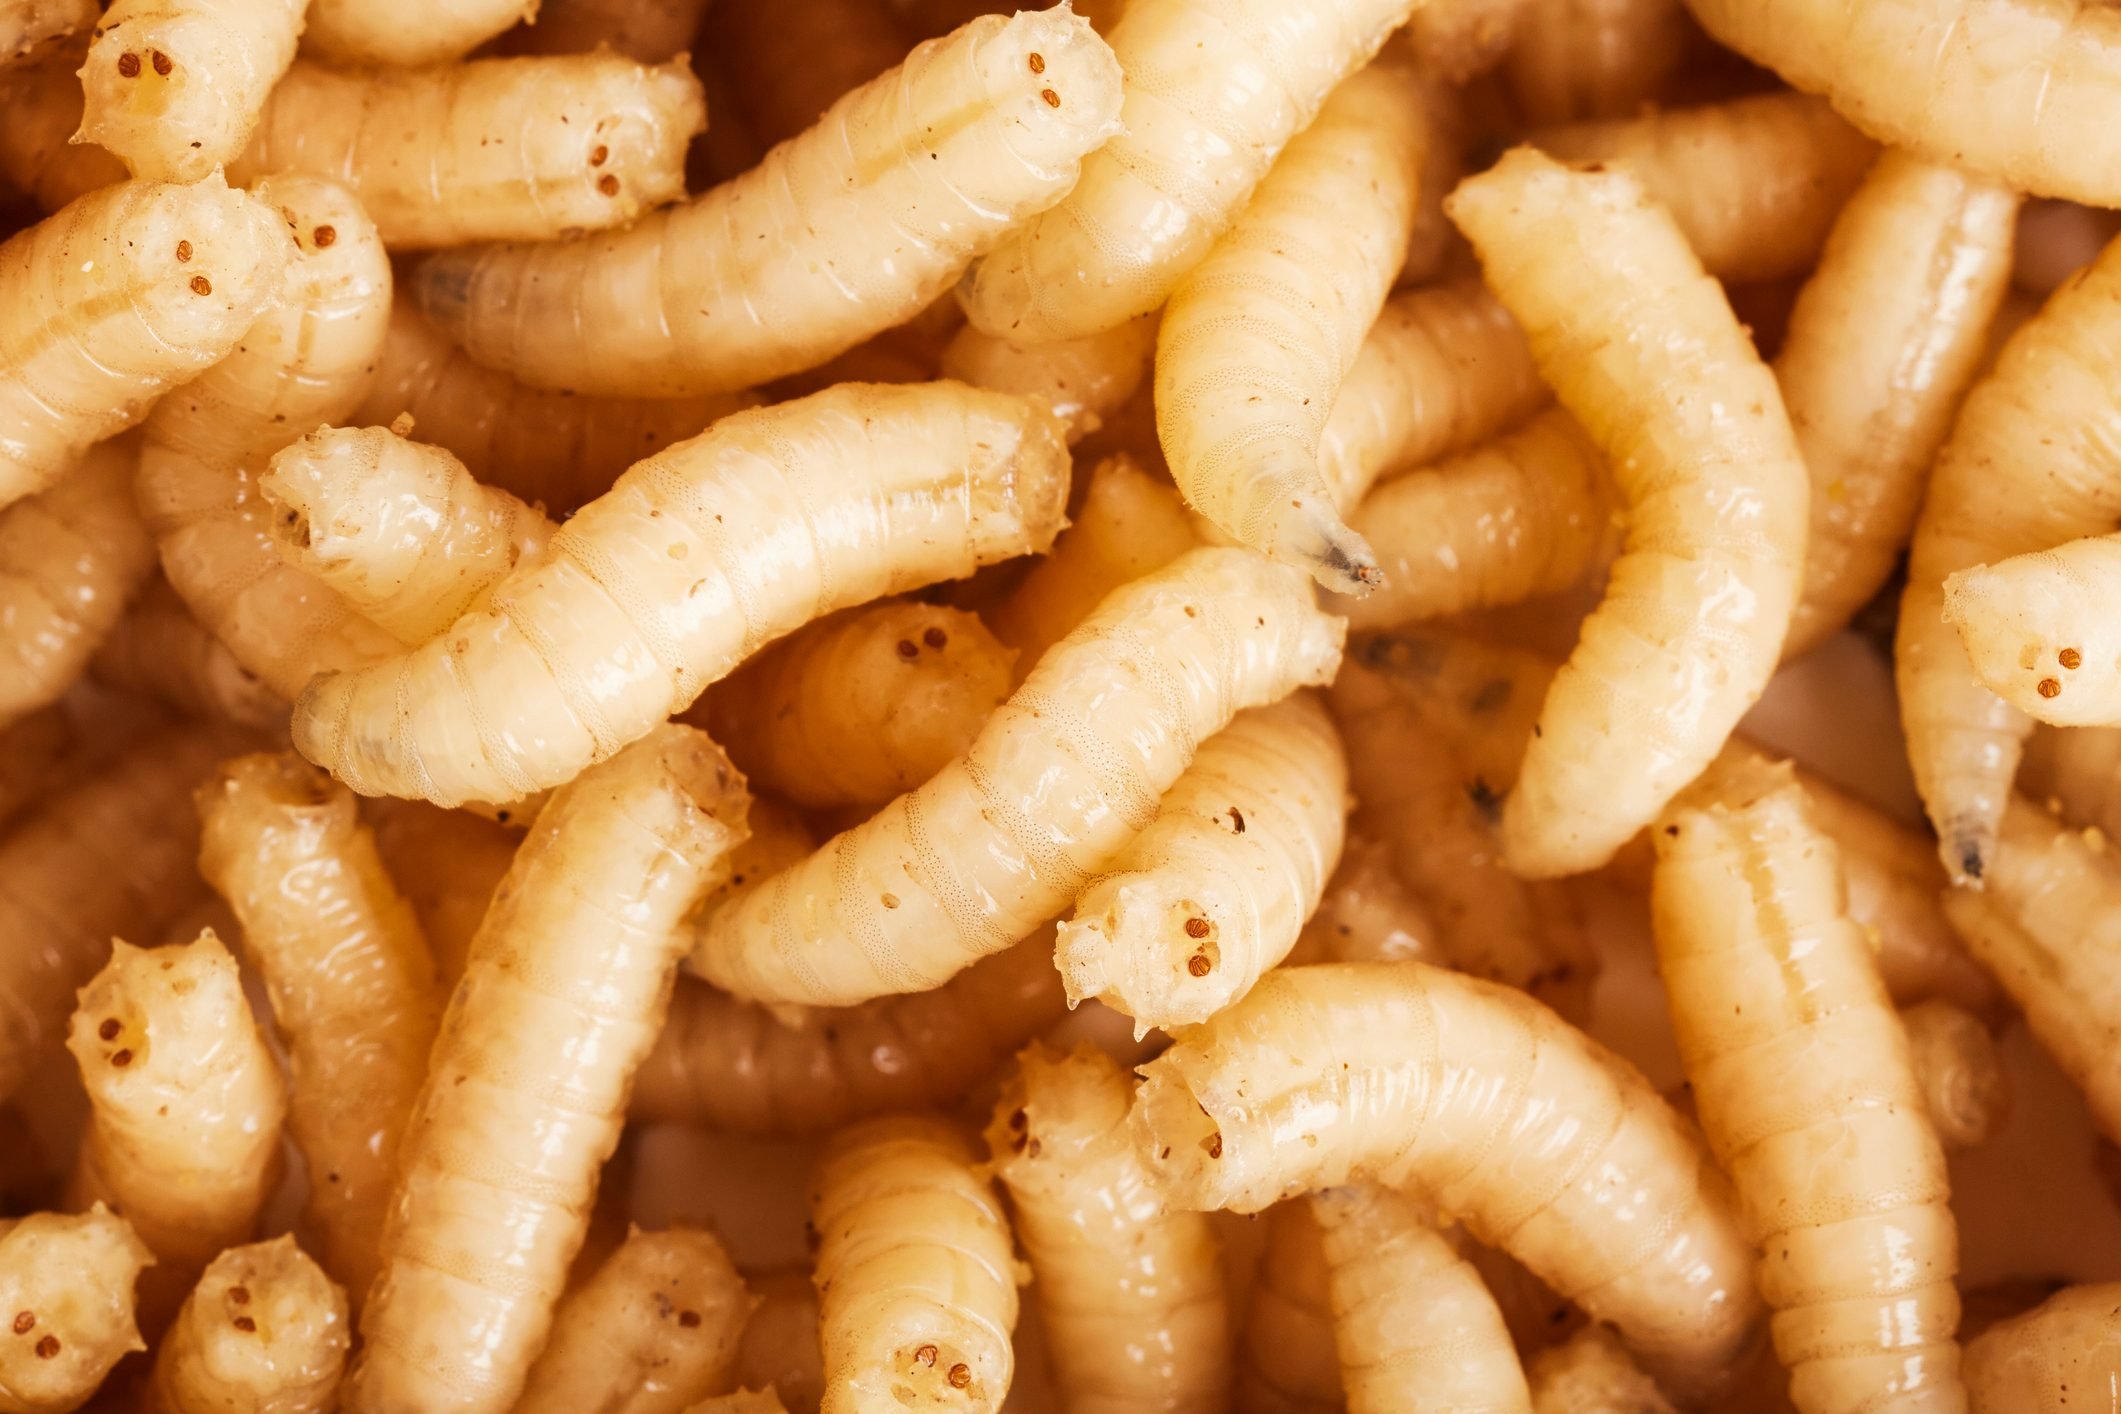 How To Get Rid of Maggots In Your Home